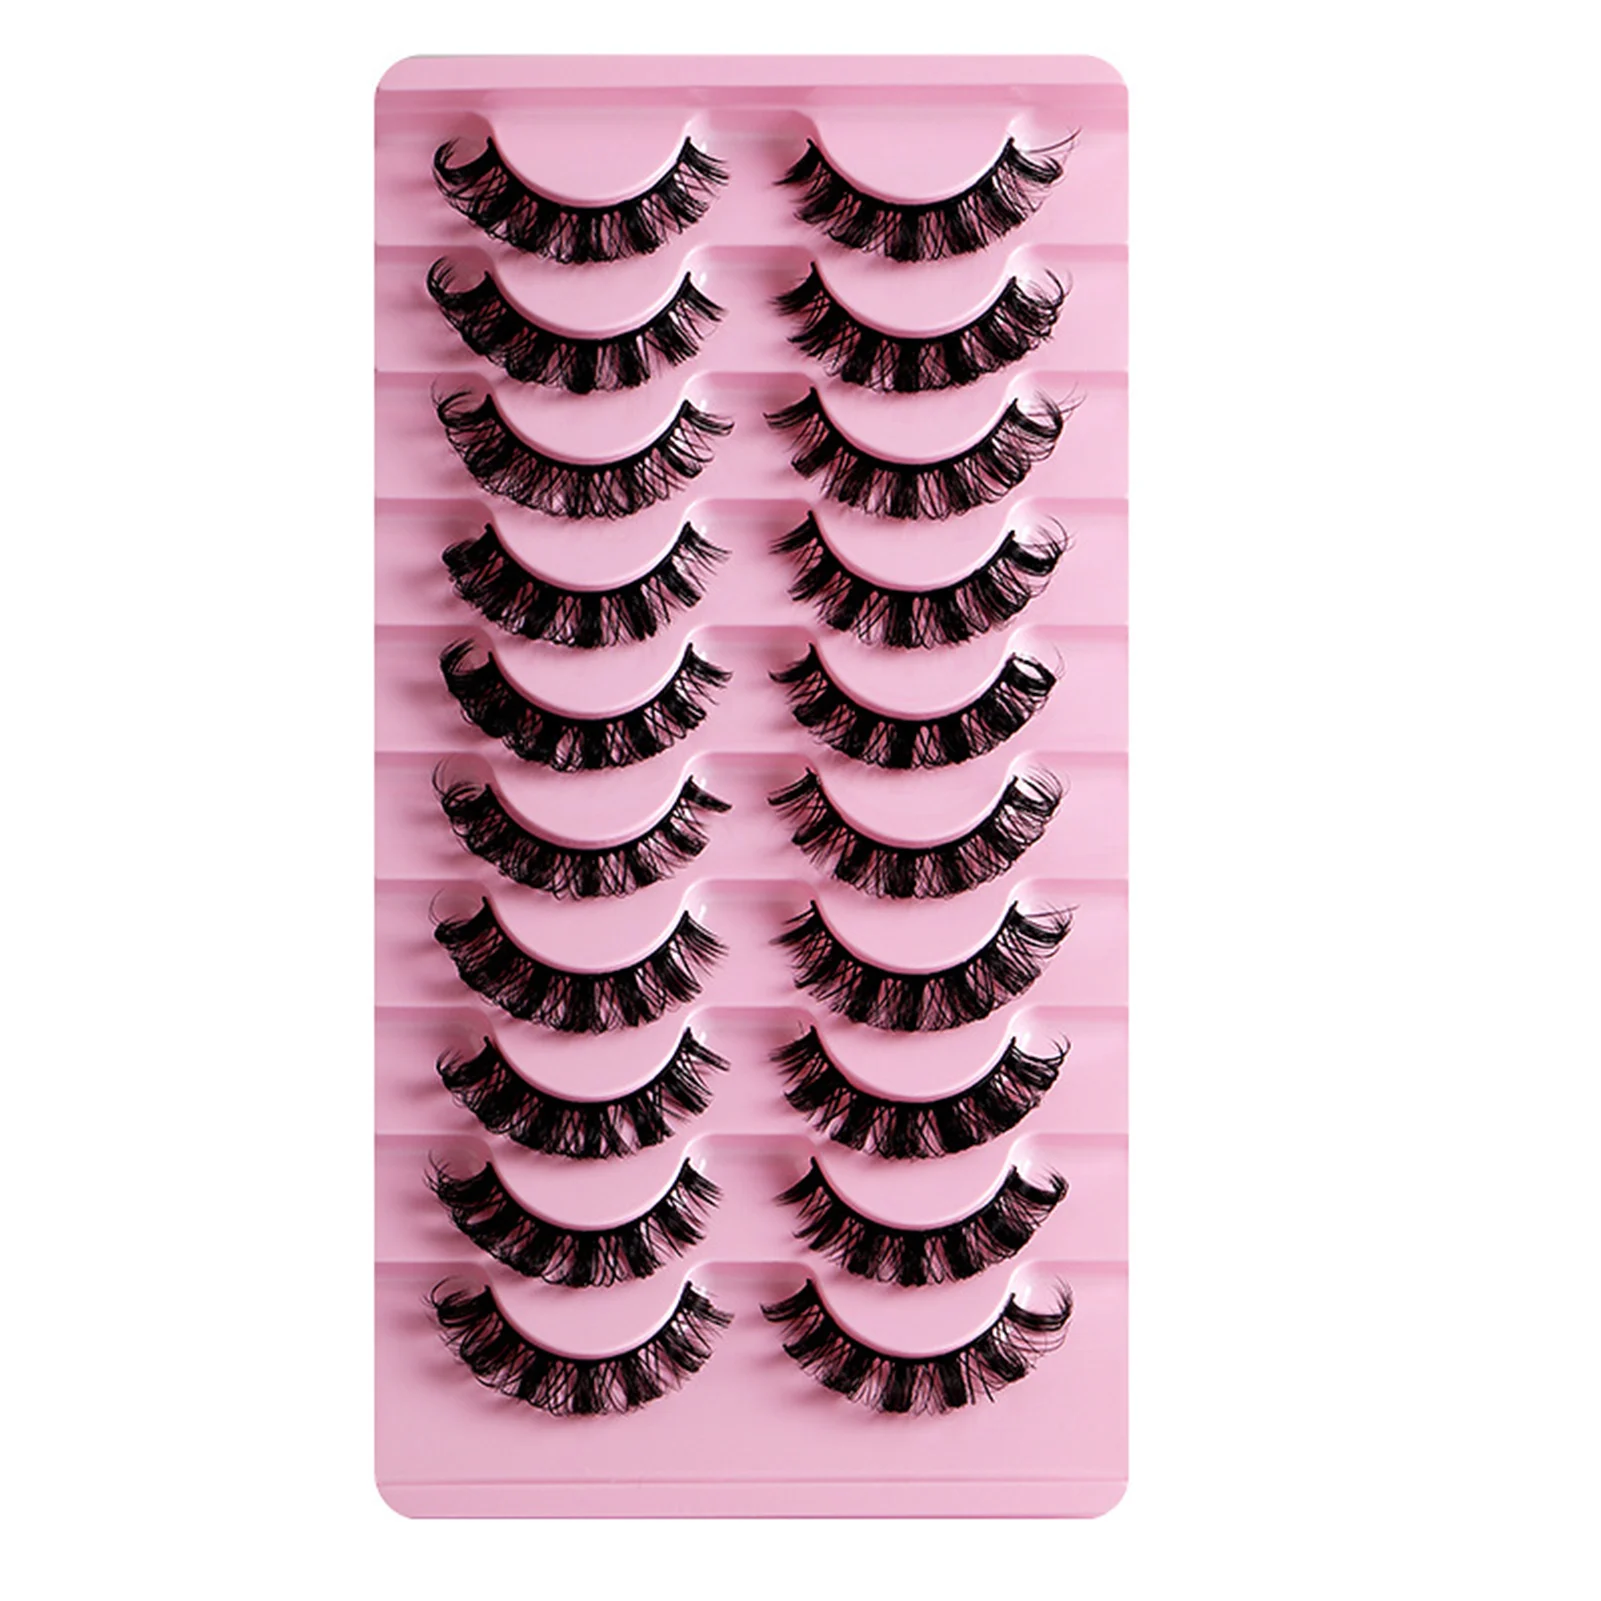 

10 Pairs Russian Curl Grafting Eyelashes Well Bedded Wispy Eyelashes Easy to Wear Cosplay Makeup DIY Eyelashes SOYW889